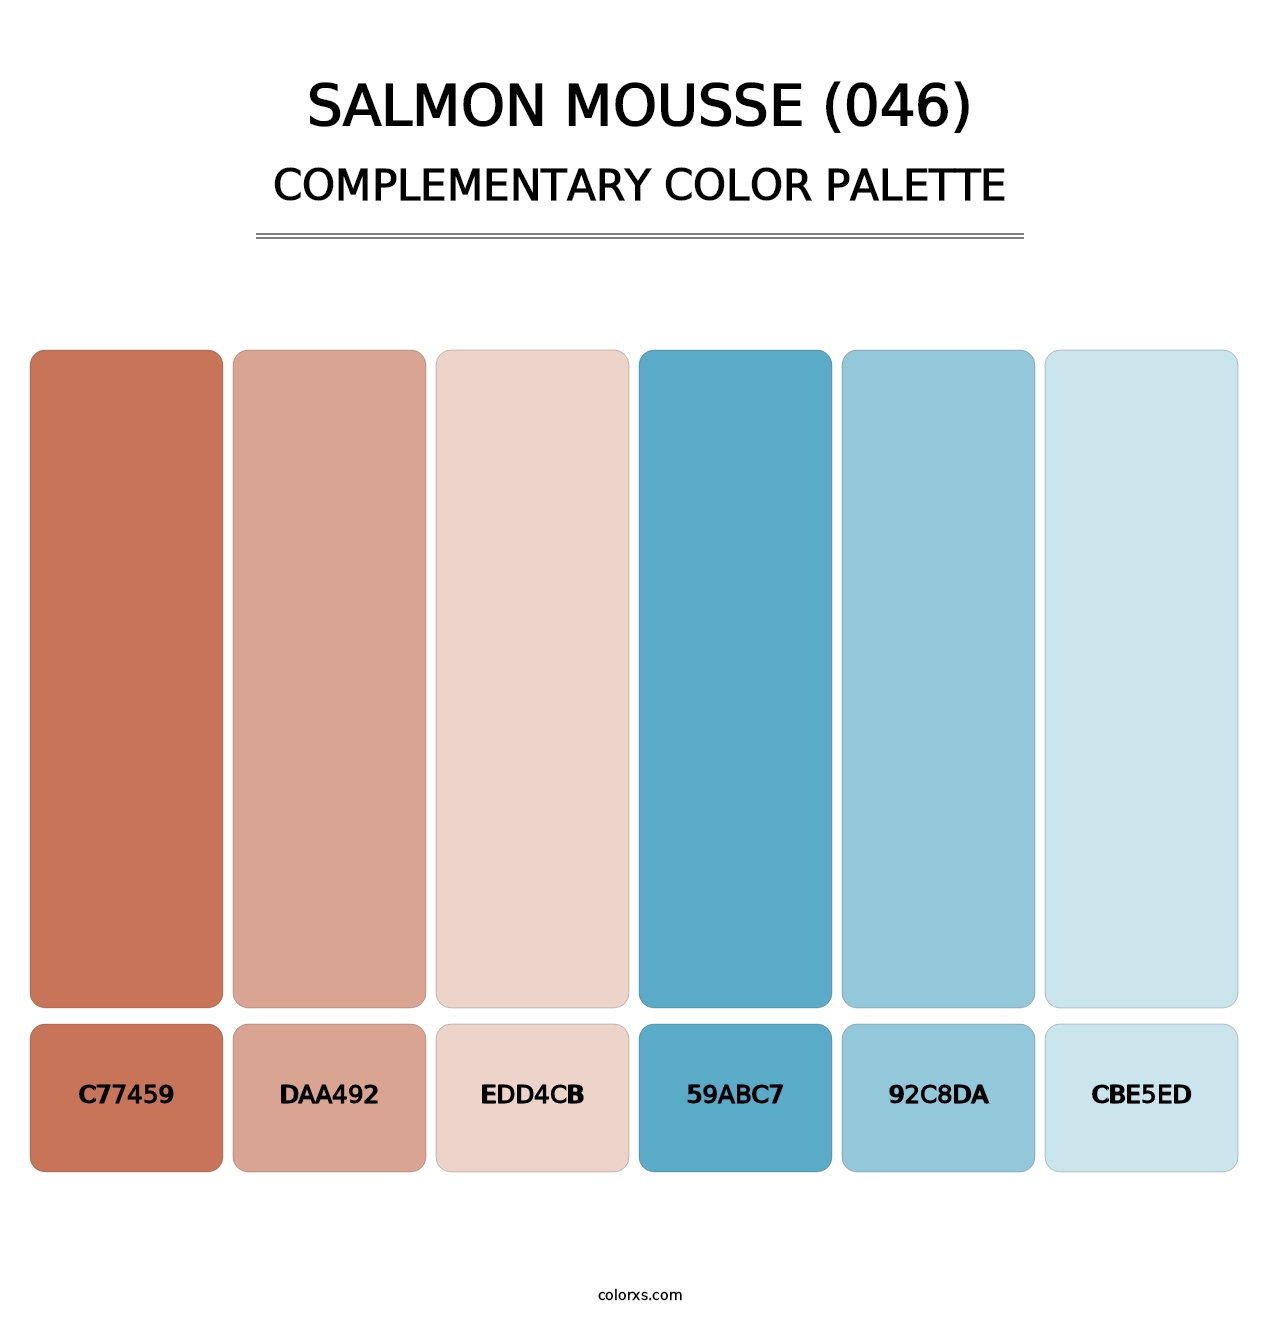 Salmon Mousse (046) - Complementary Color Palette